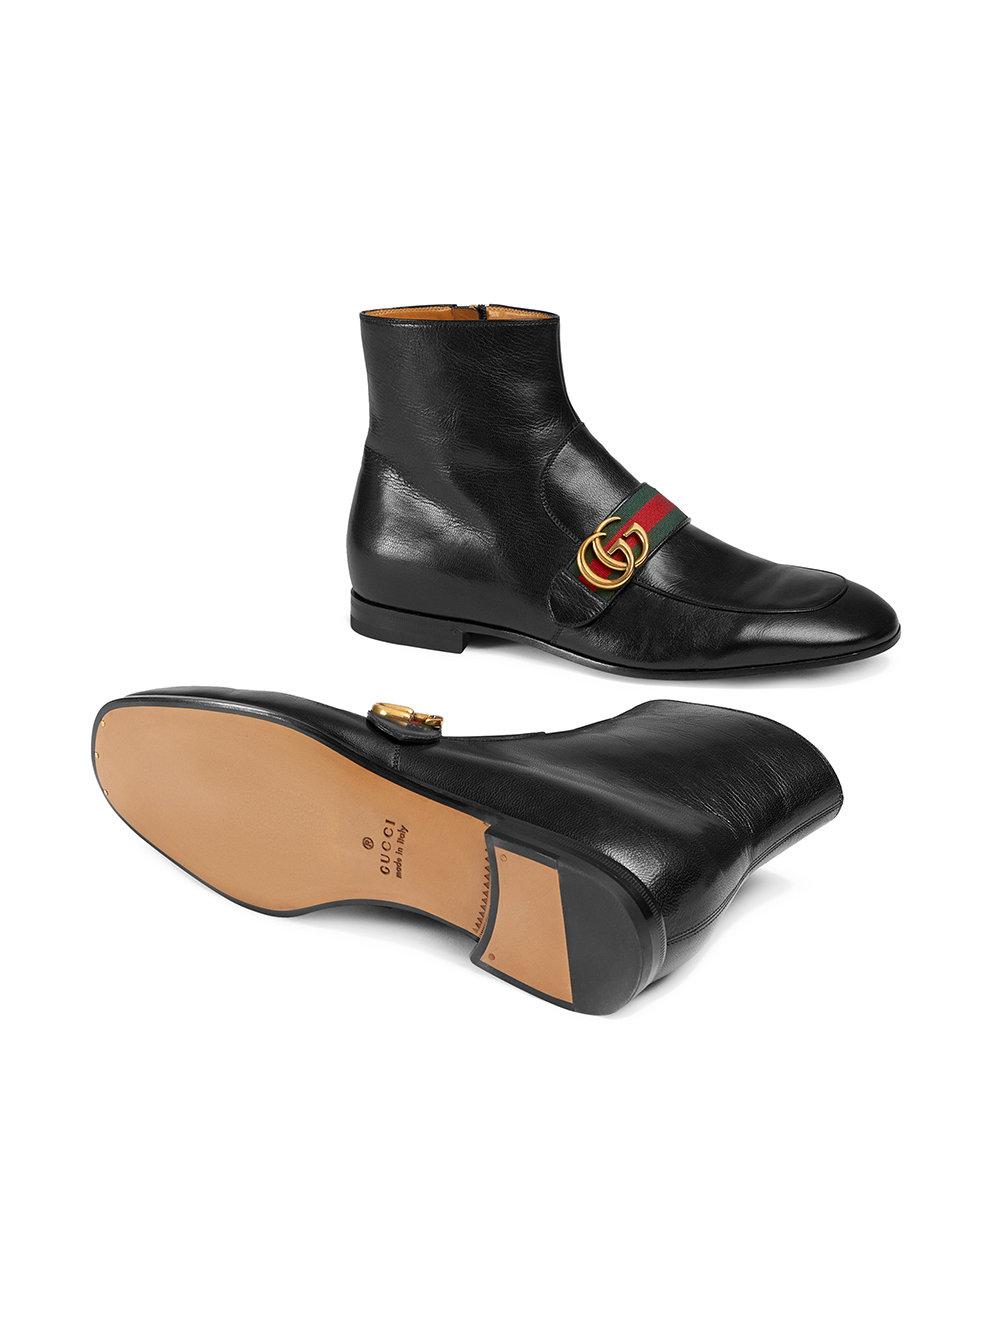 Gucci Leather Boots With Double G in Black Leather (Black) for Men - Lyst